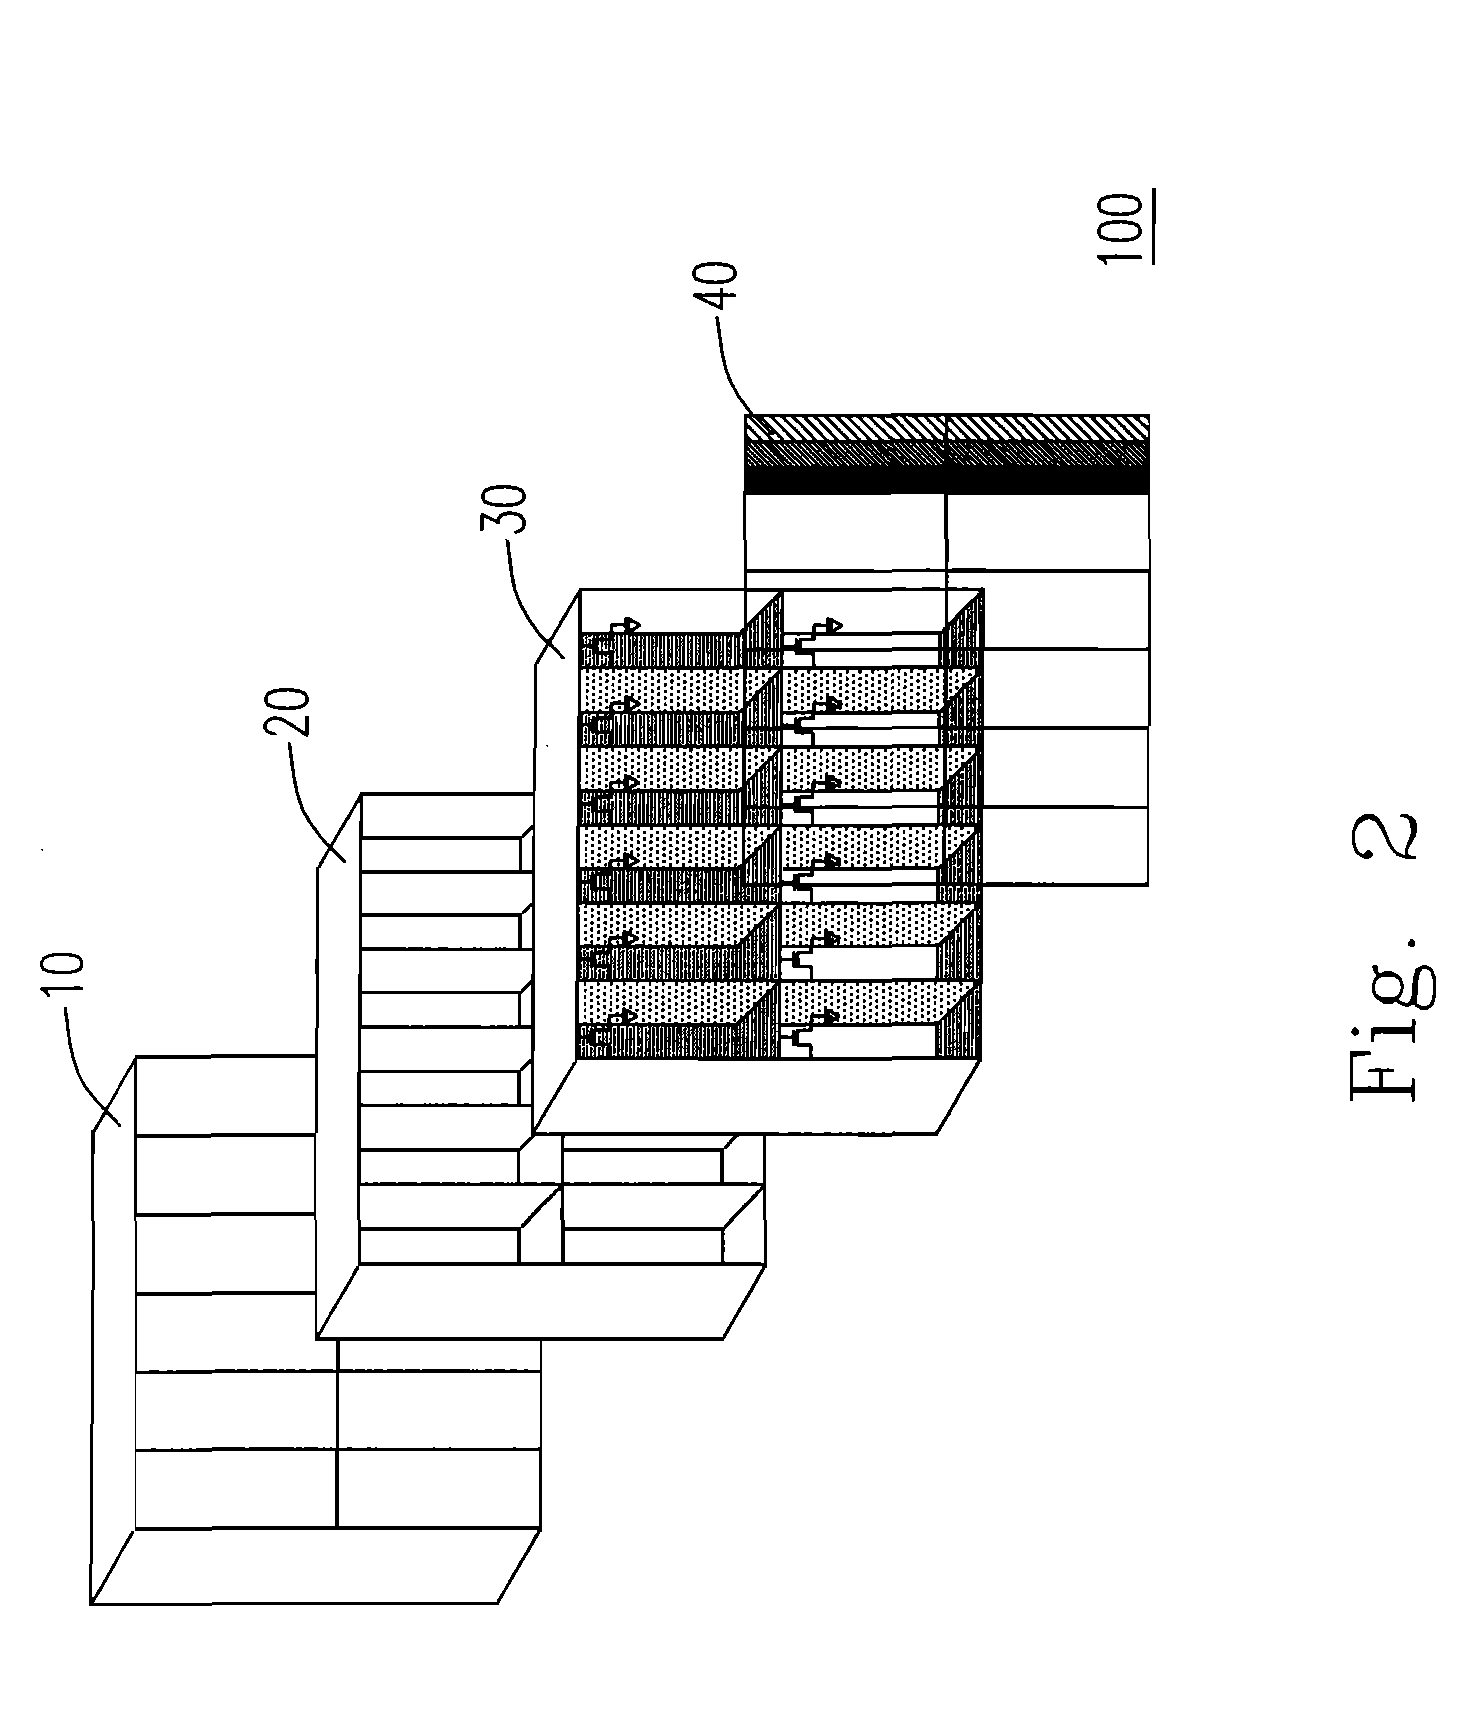 Driving system for matrix type backlight module